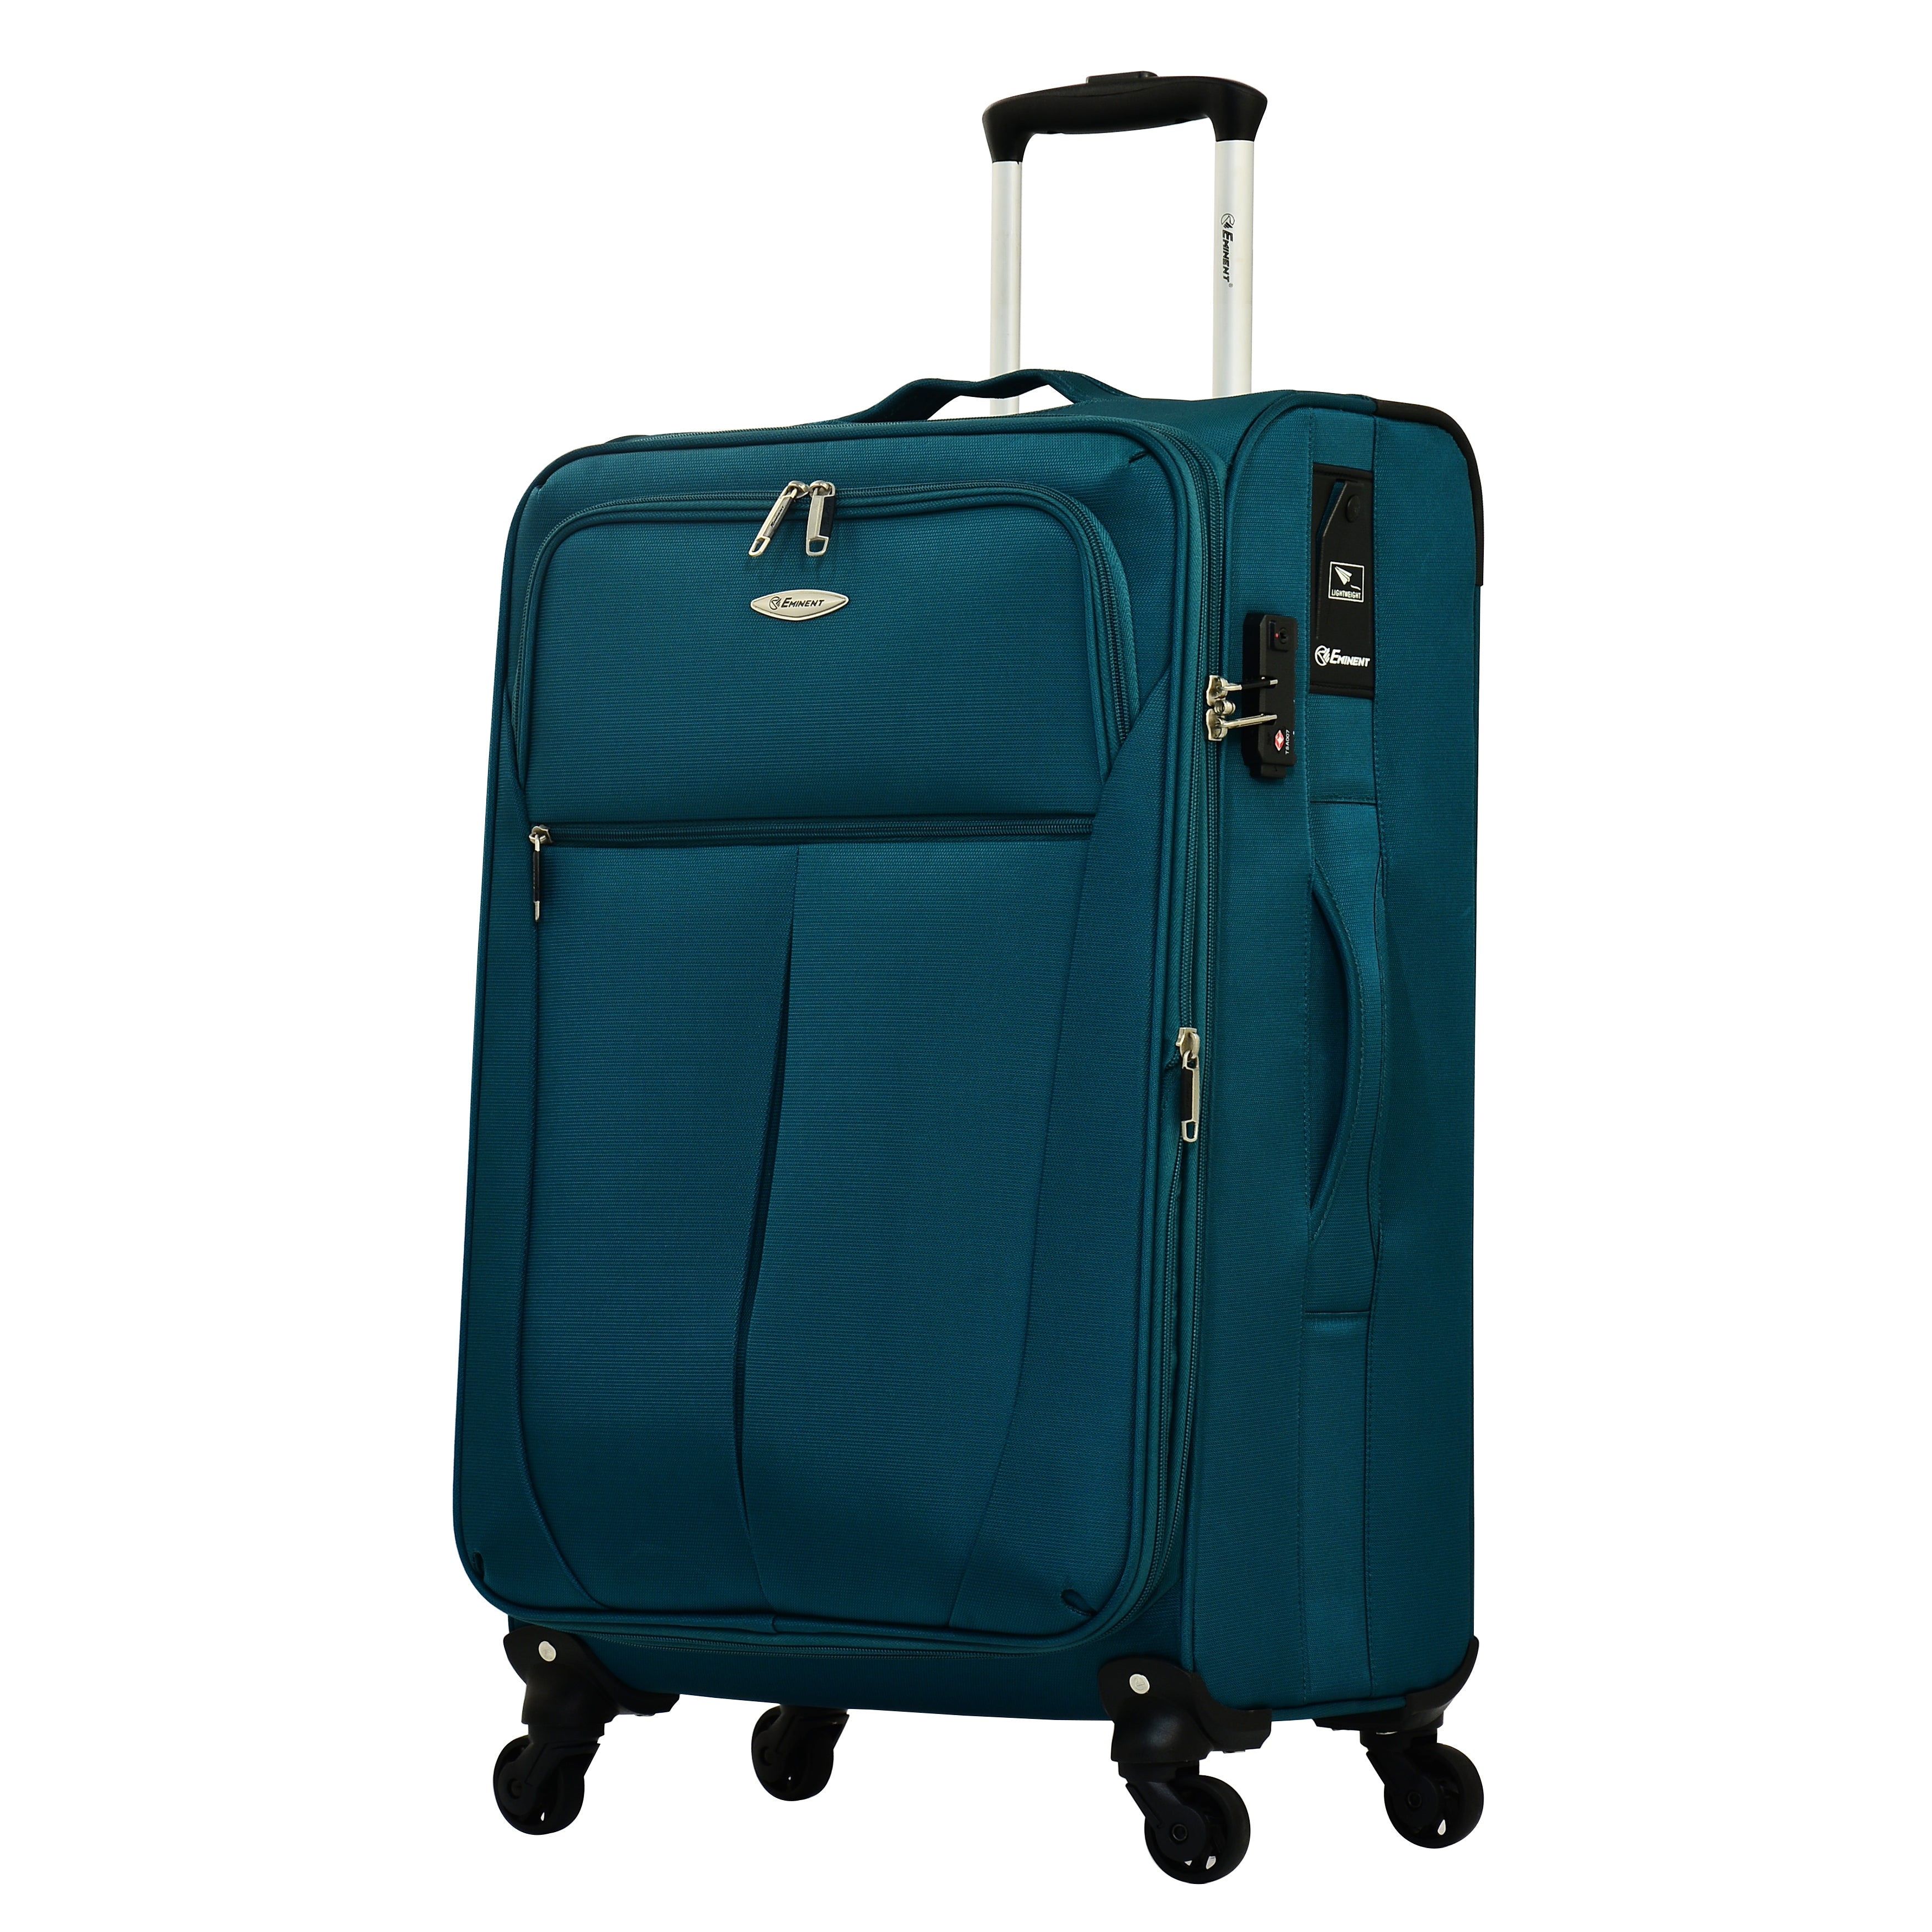 Eminent Lightweight 24” inch checked baggage trolley (S0190-24)